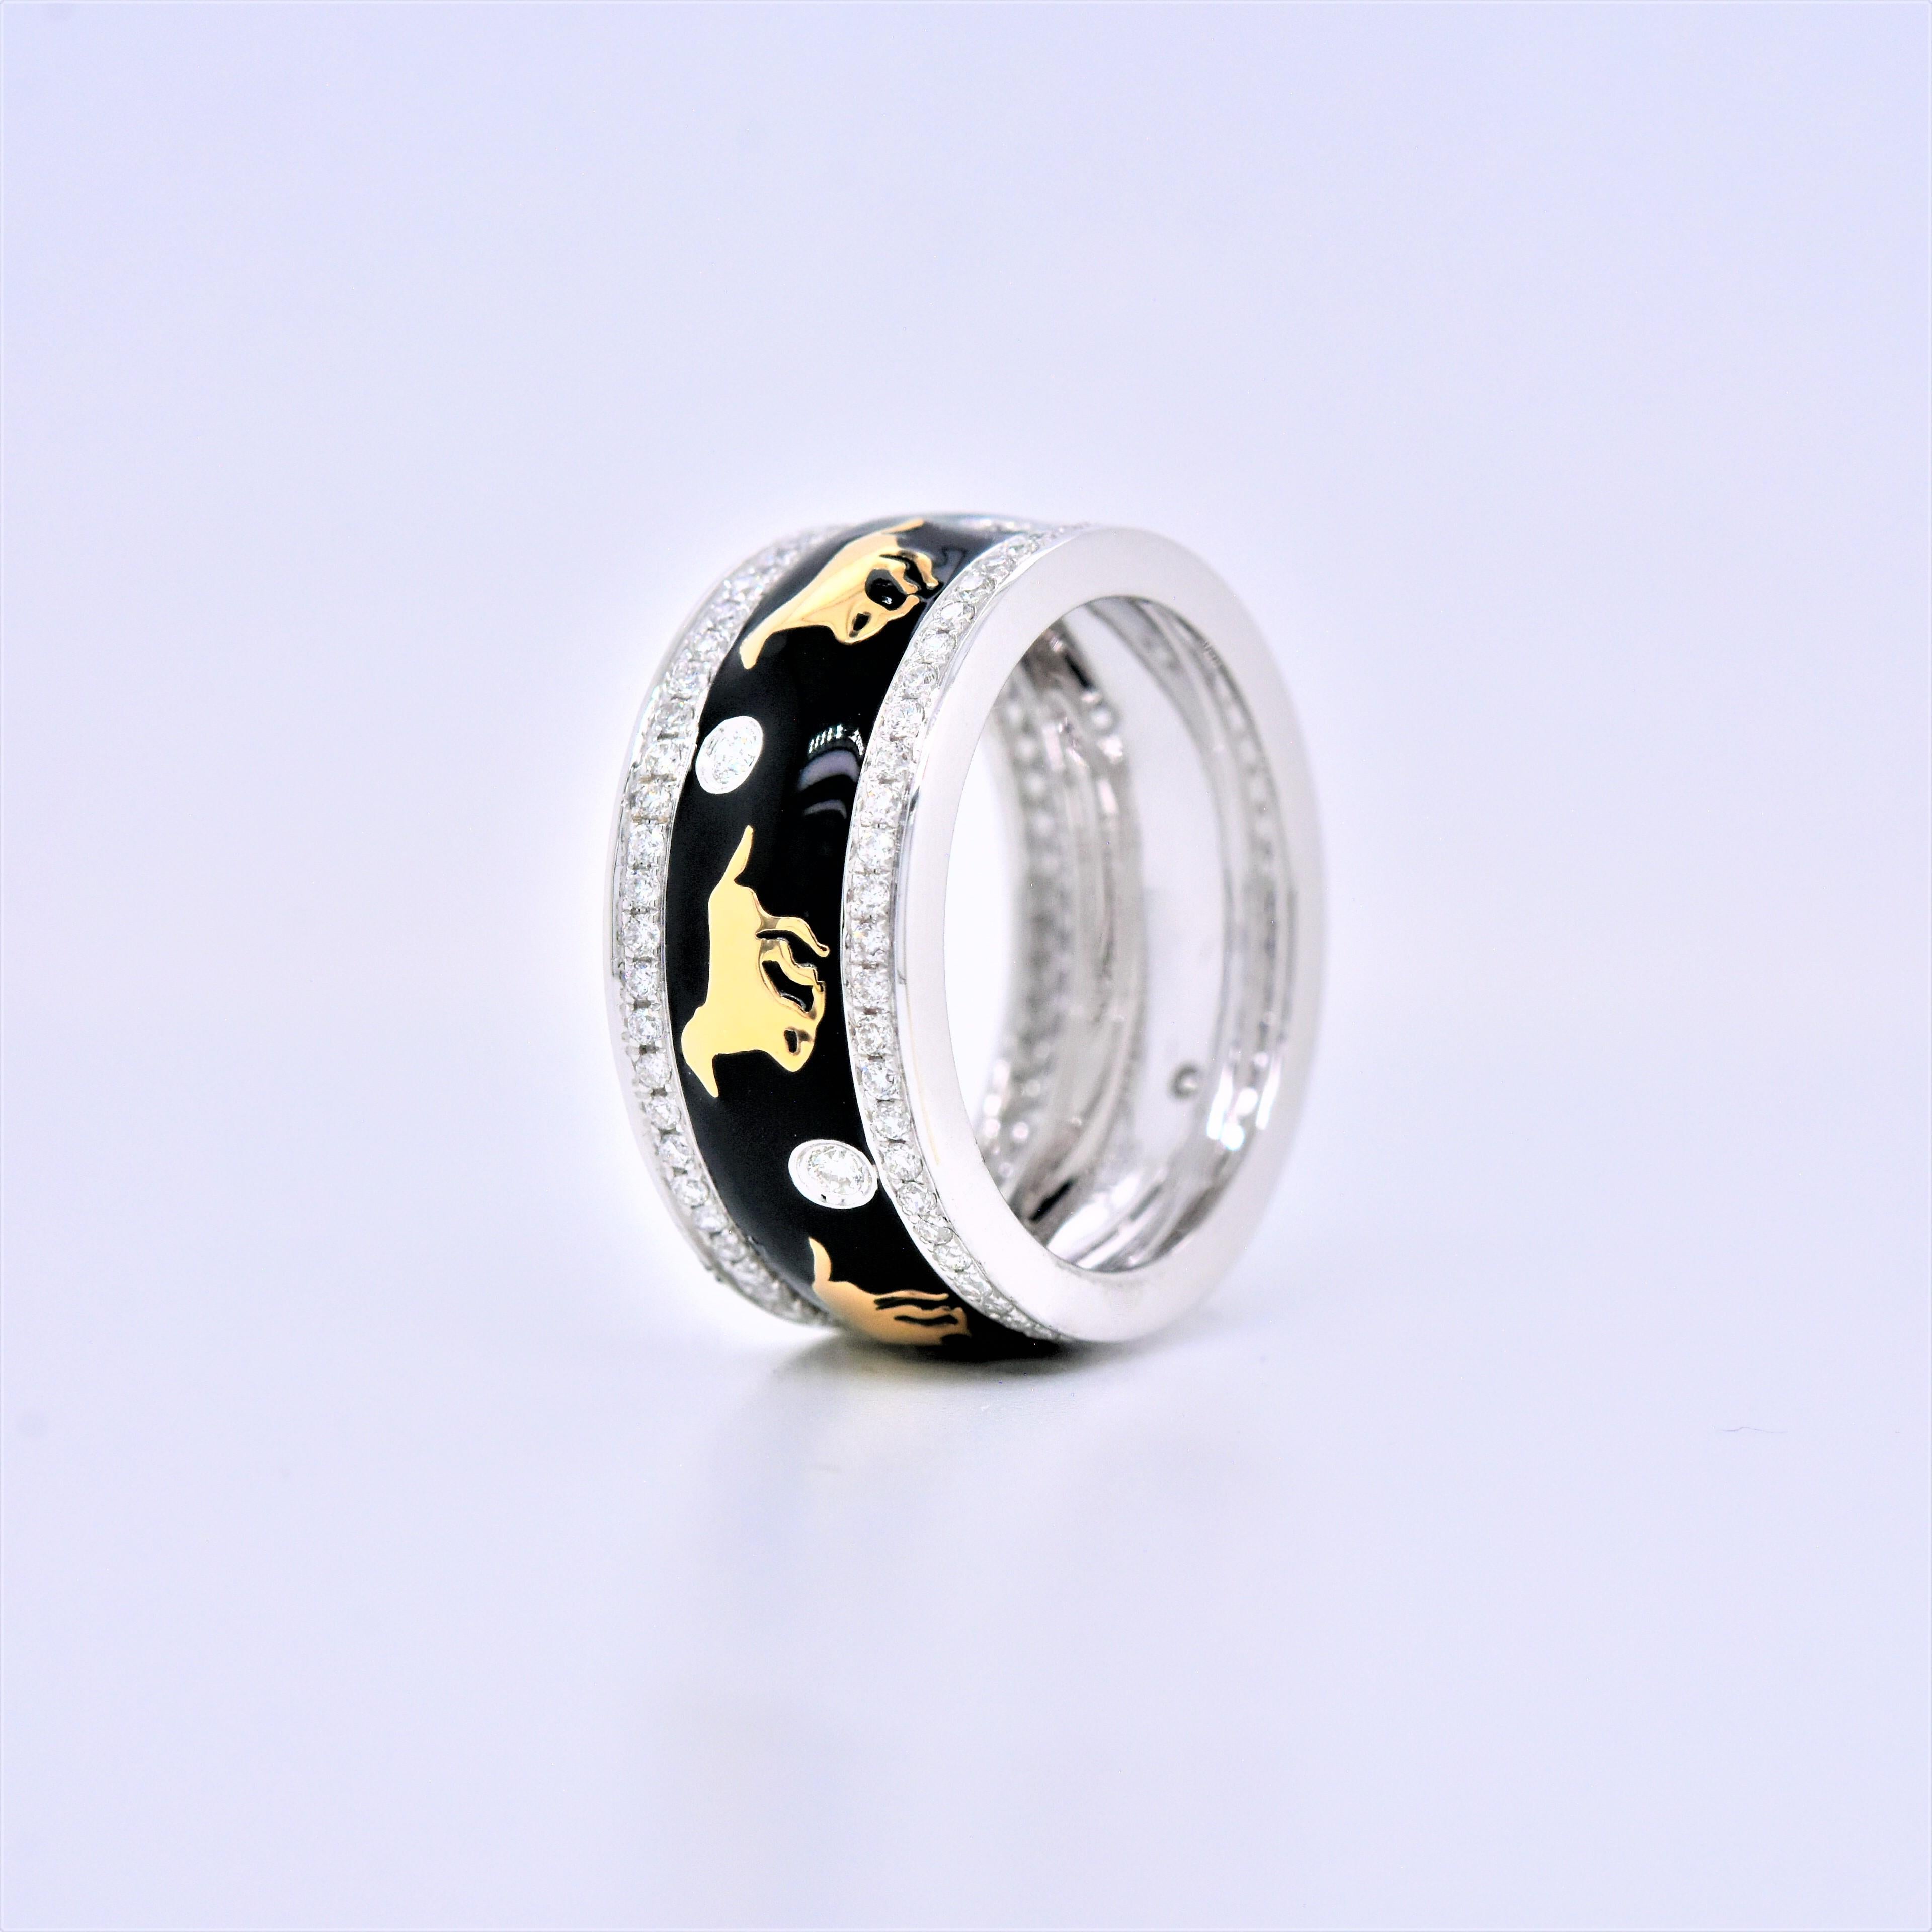 This Enamel ring is in printed enamel with gold plated. This style depicts a horse scene on a black colored background.
18K White Gold Black Enamel Horse Ring with Diamonds. 

Diamond And Gold Breakdown:
0.68 Carats Round White Diamonds - Totaling